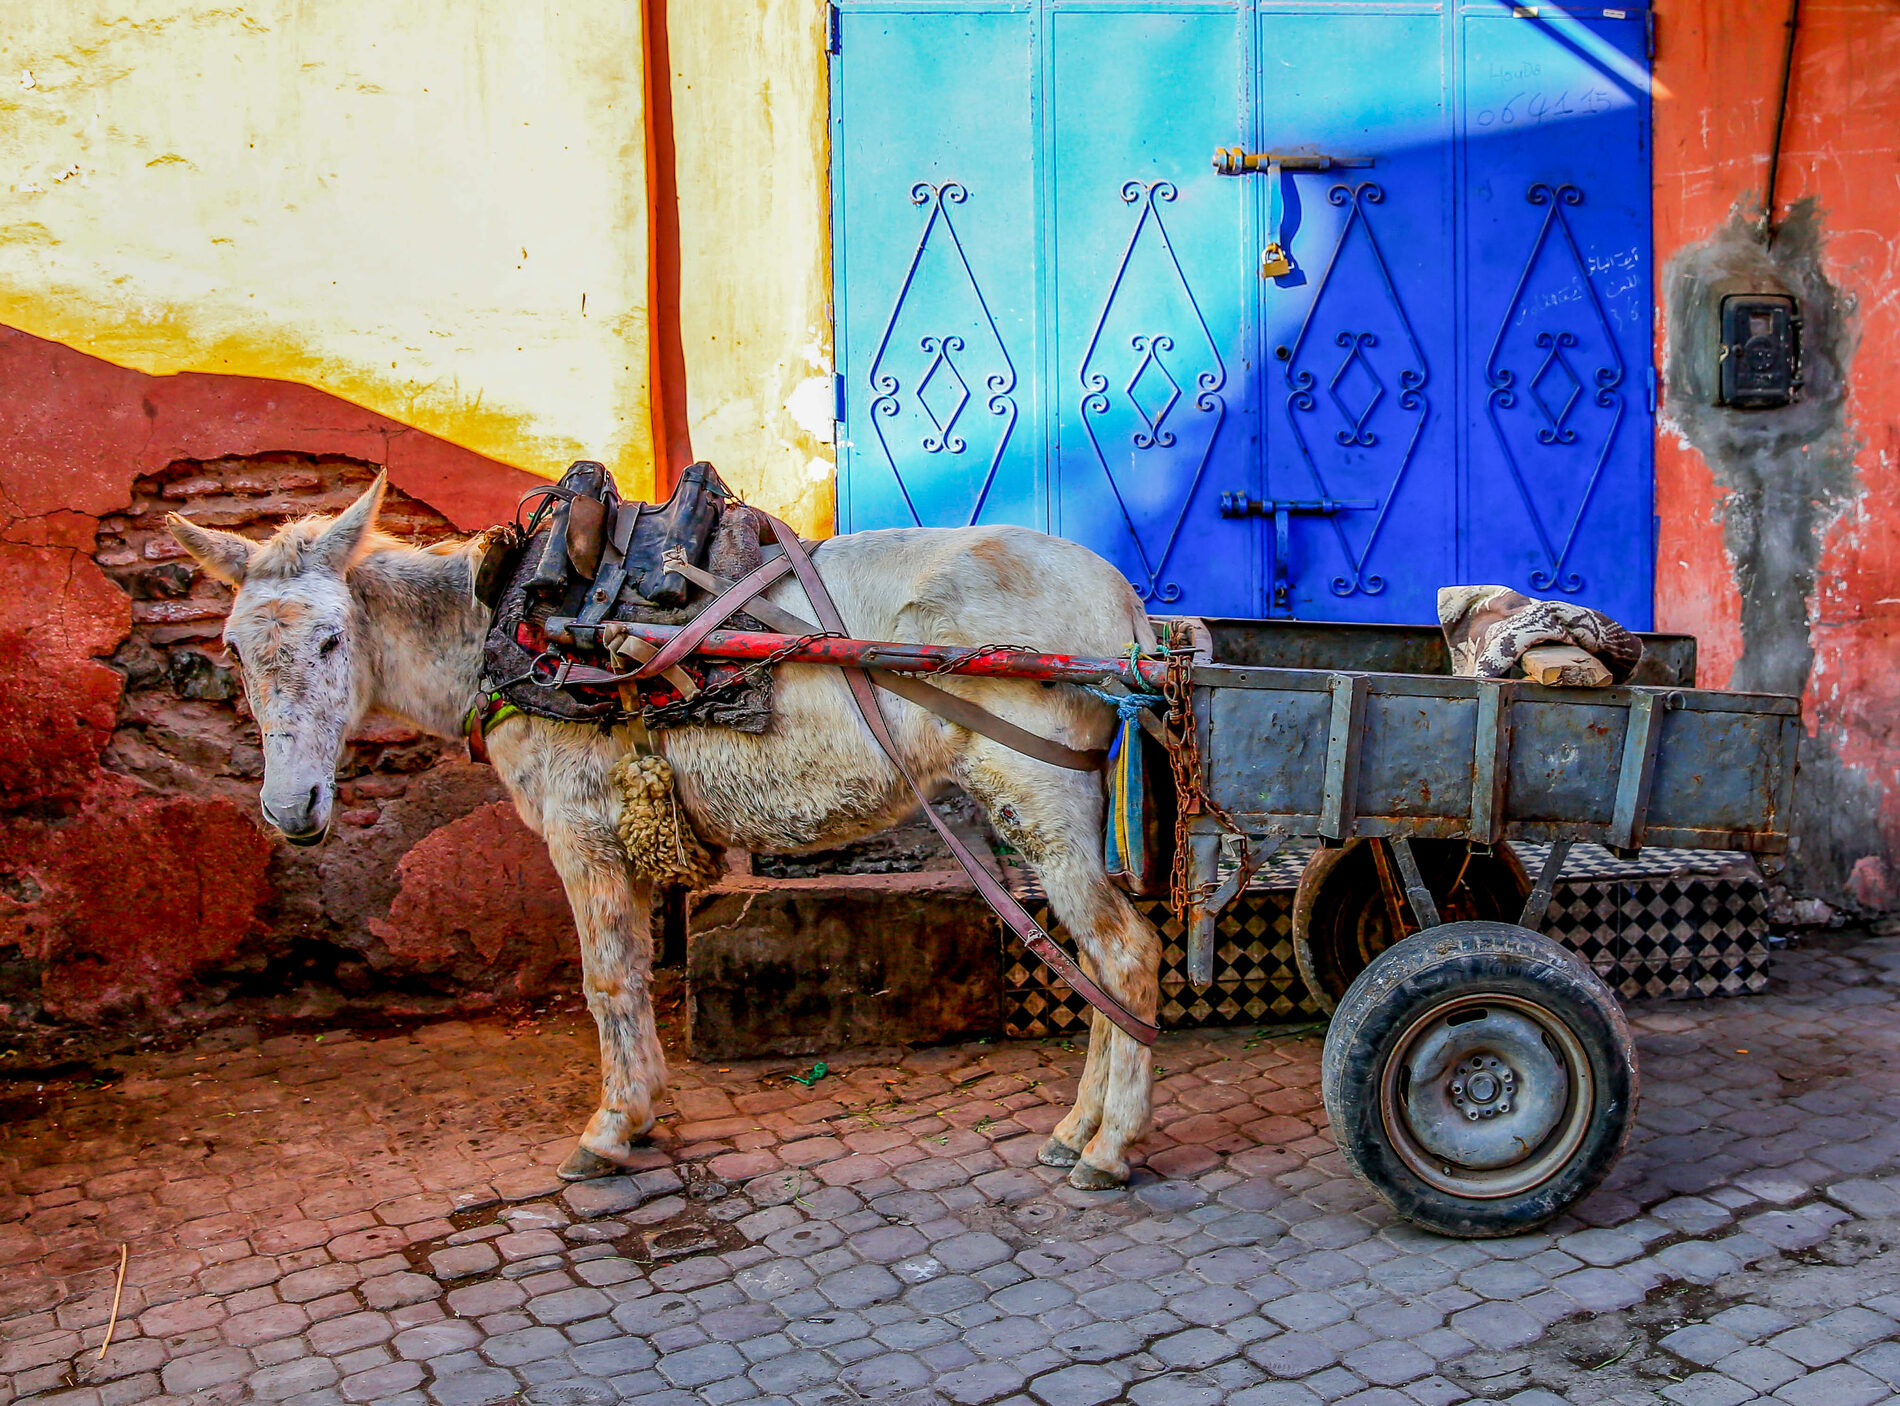 A mule with patchy, light fur attatched to a cart in front of a blue door on a cobblestone street.